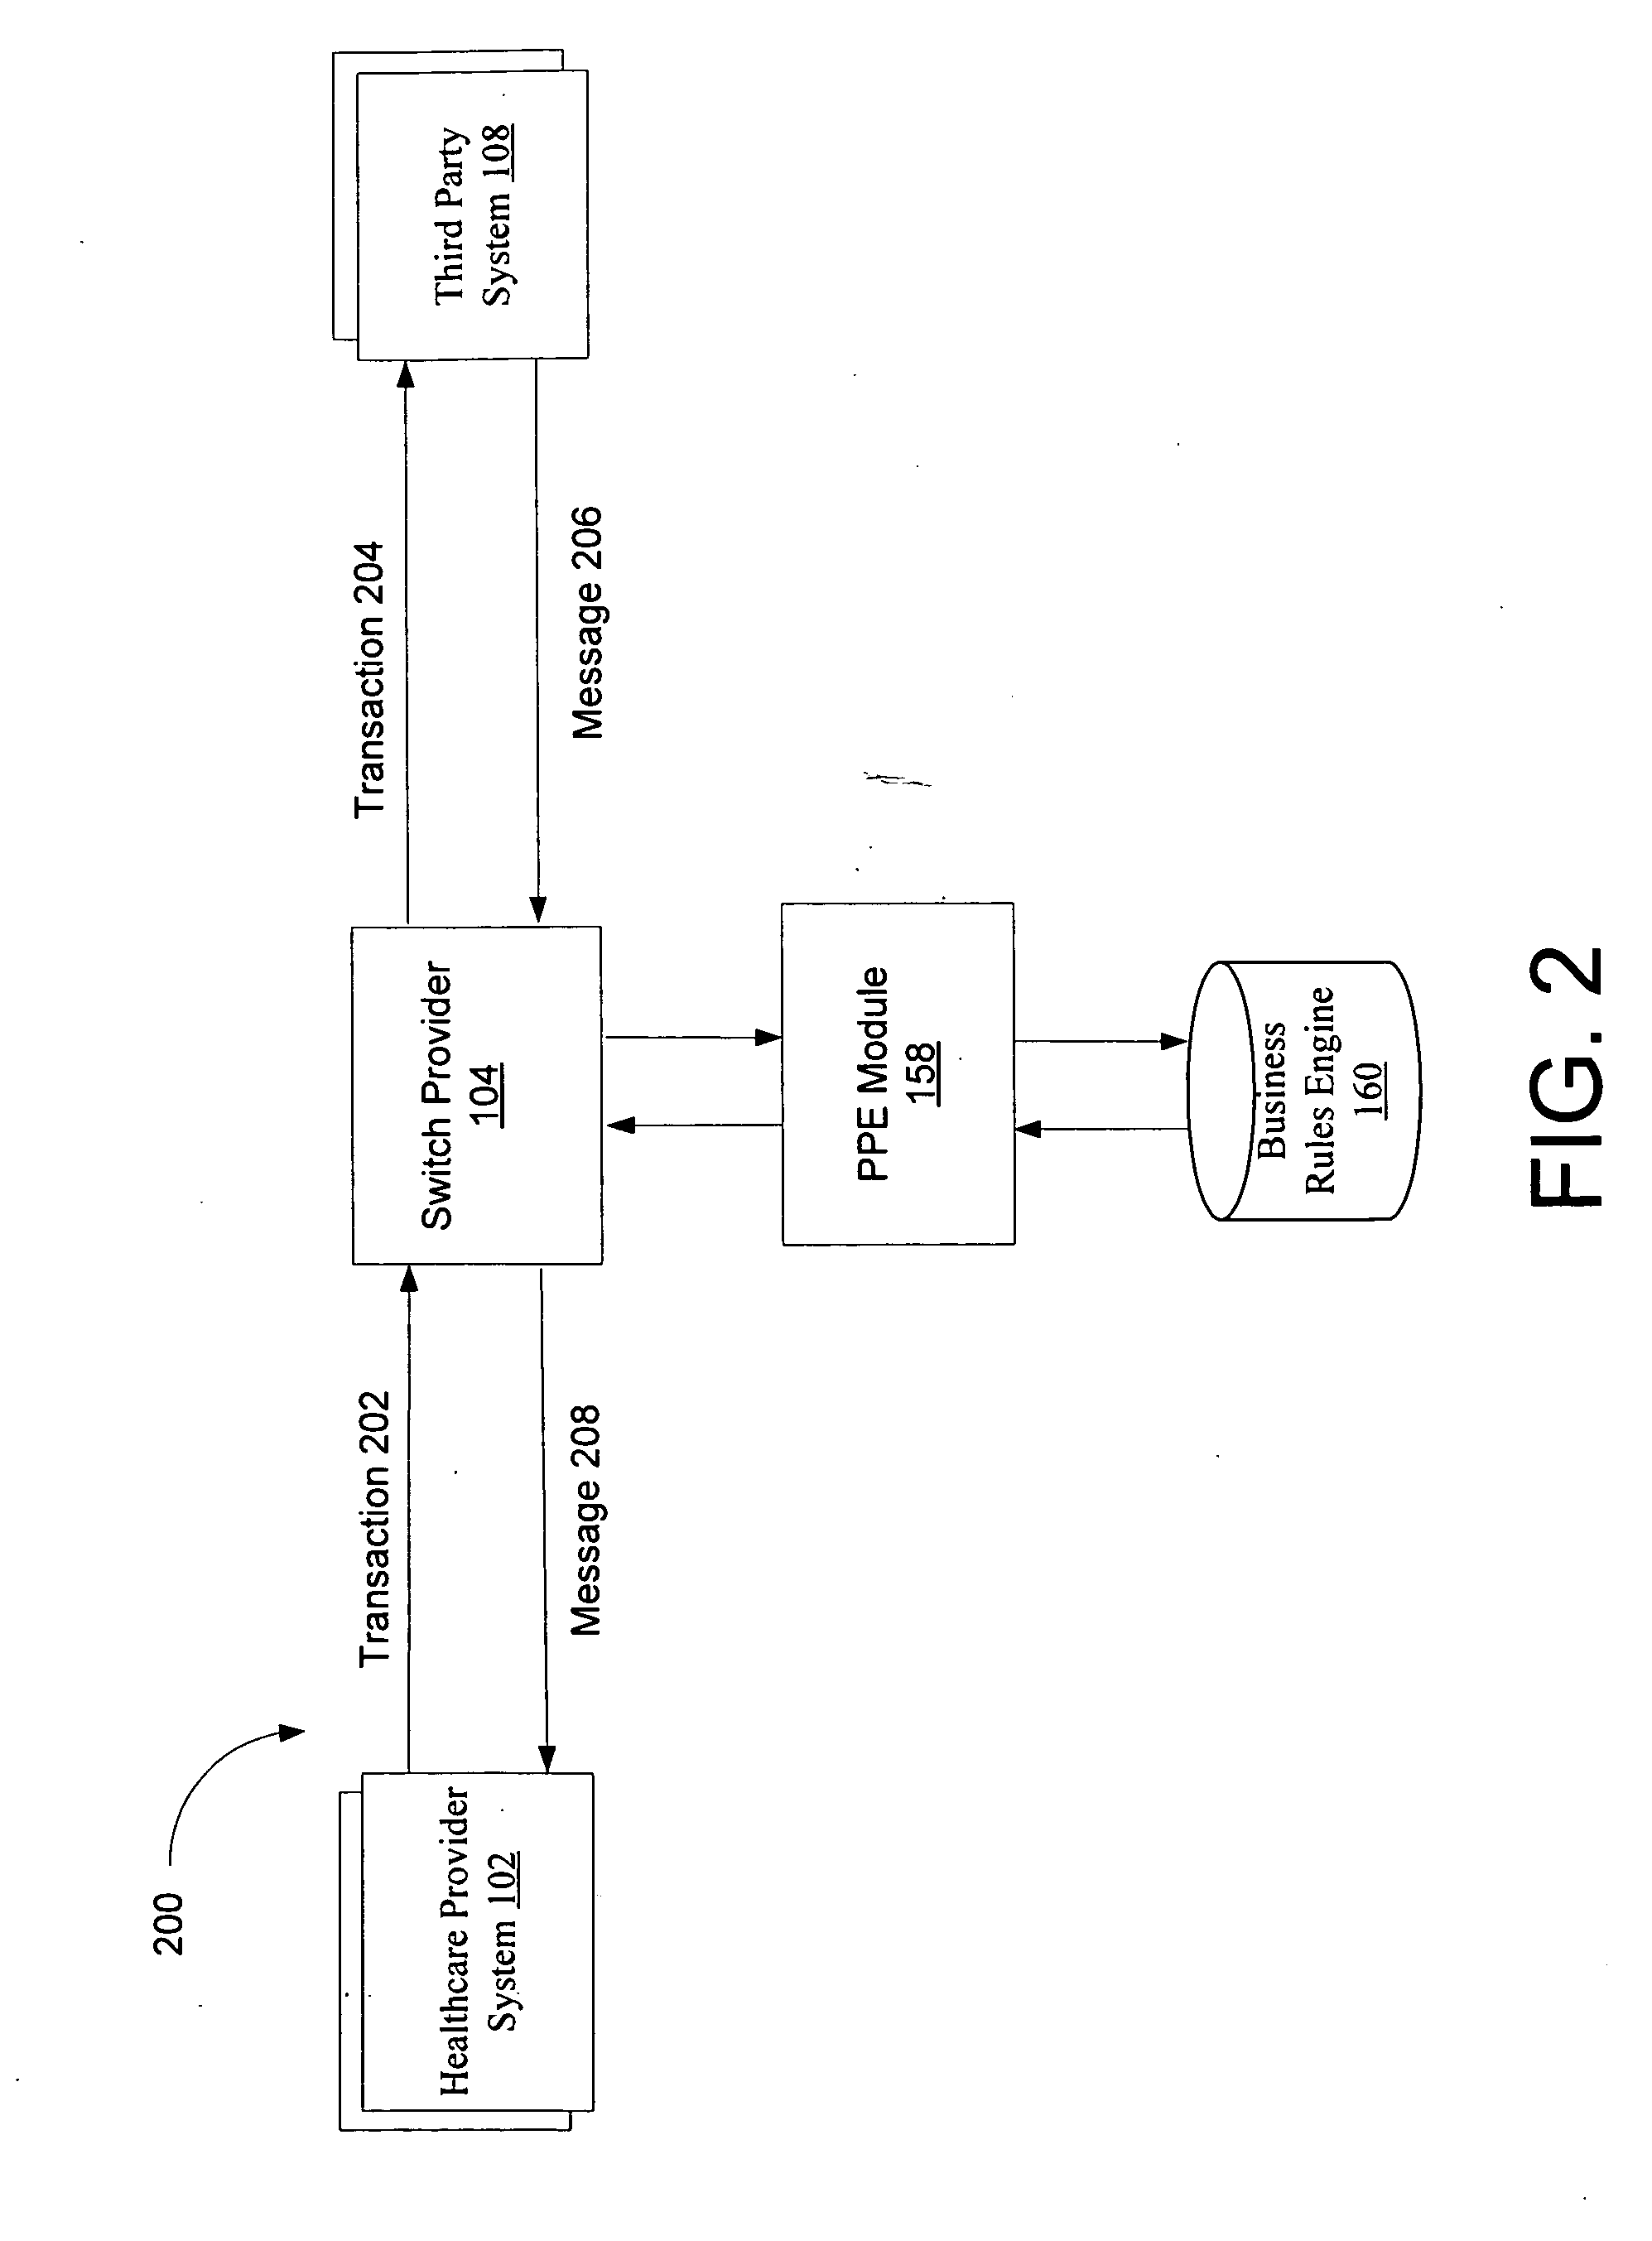 Systems and methods for processing electronically transmitted healthcare related transactions